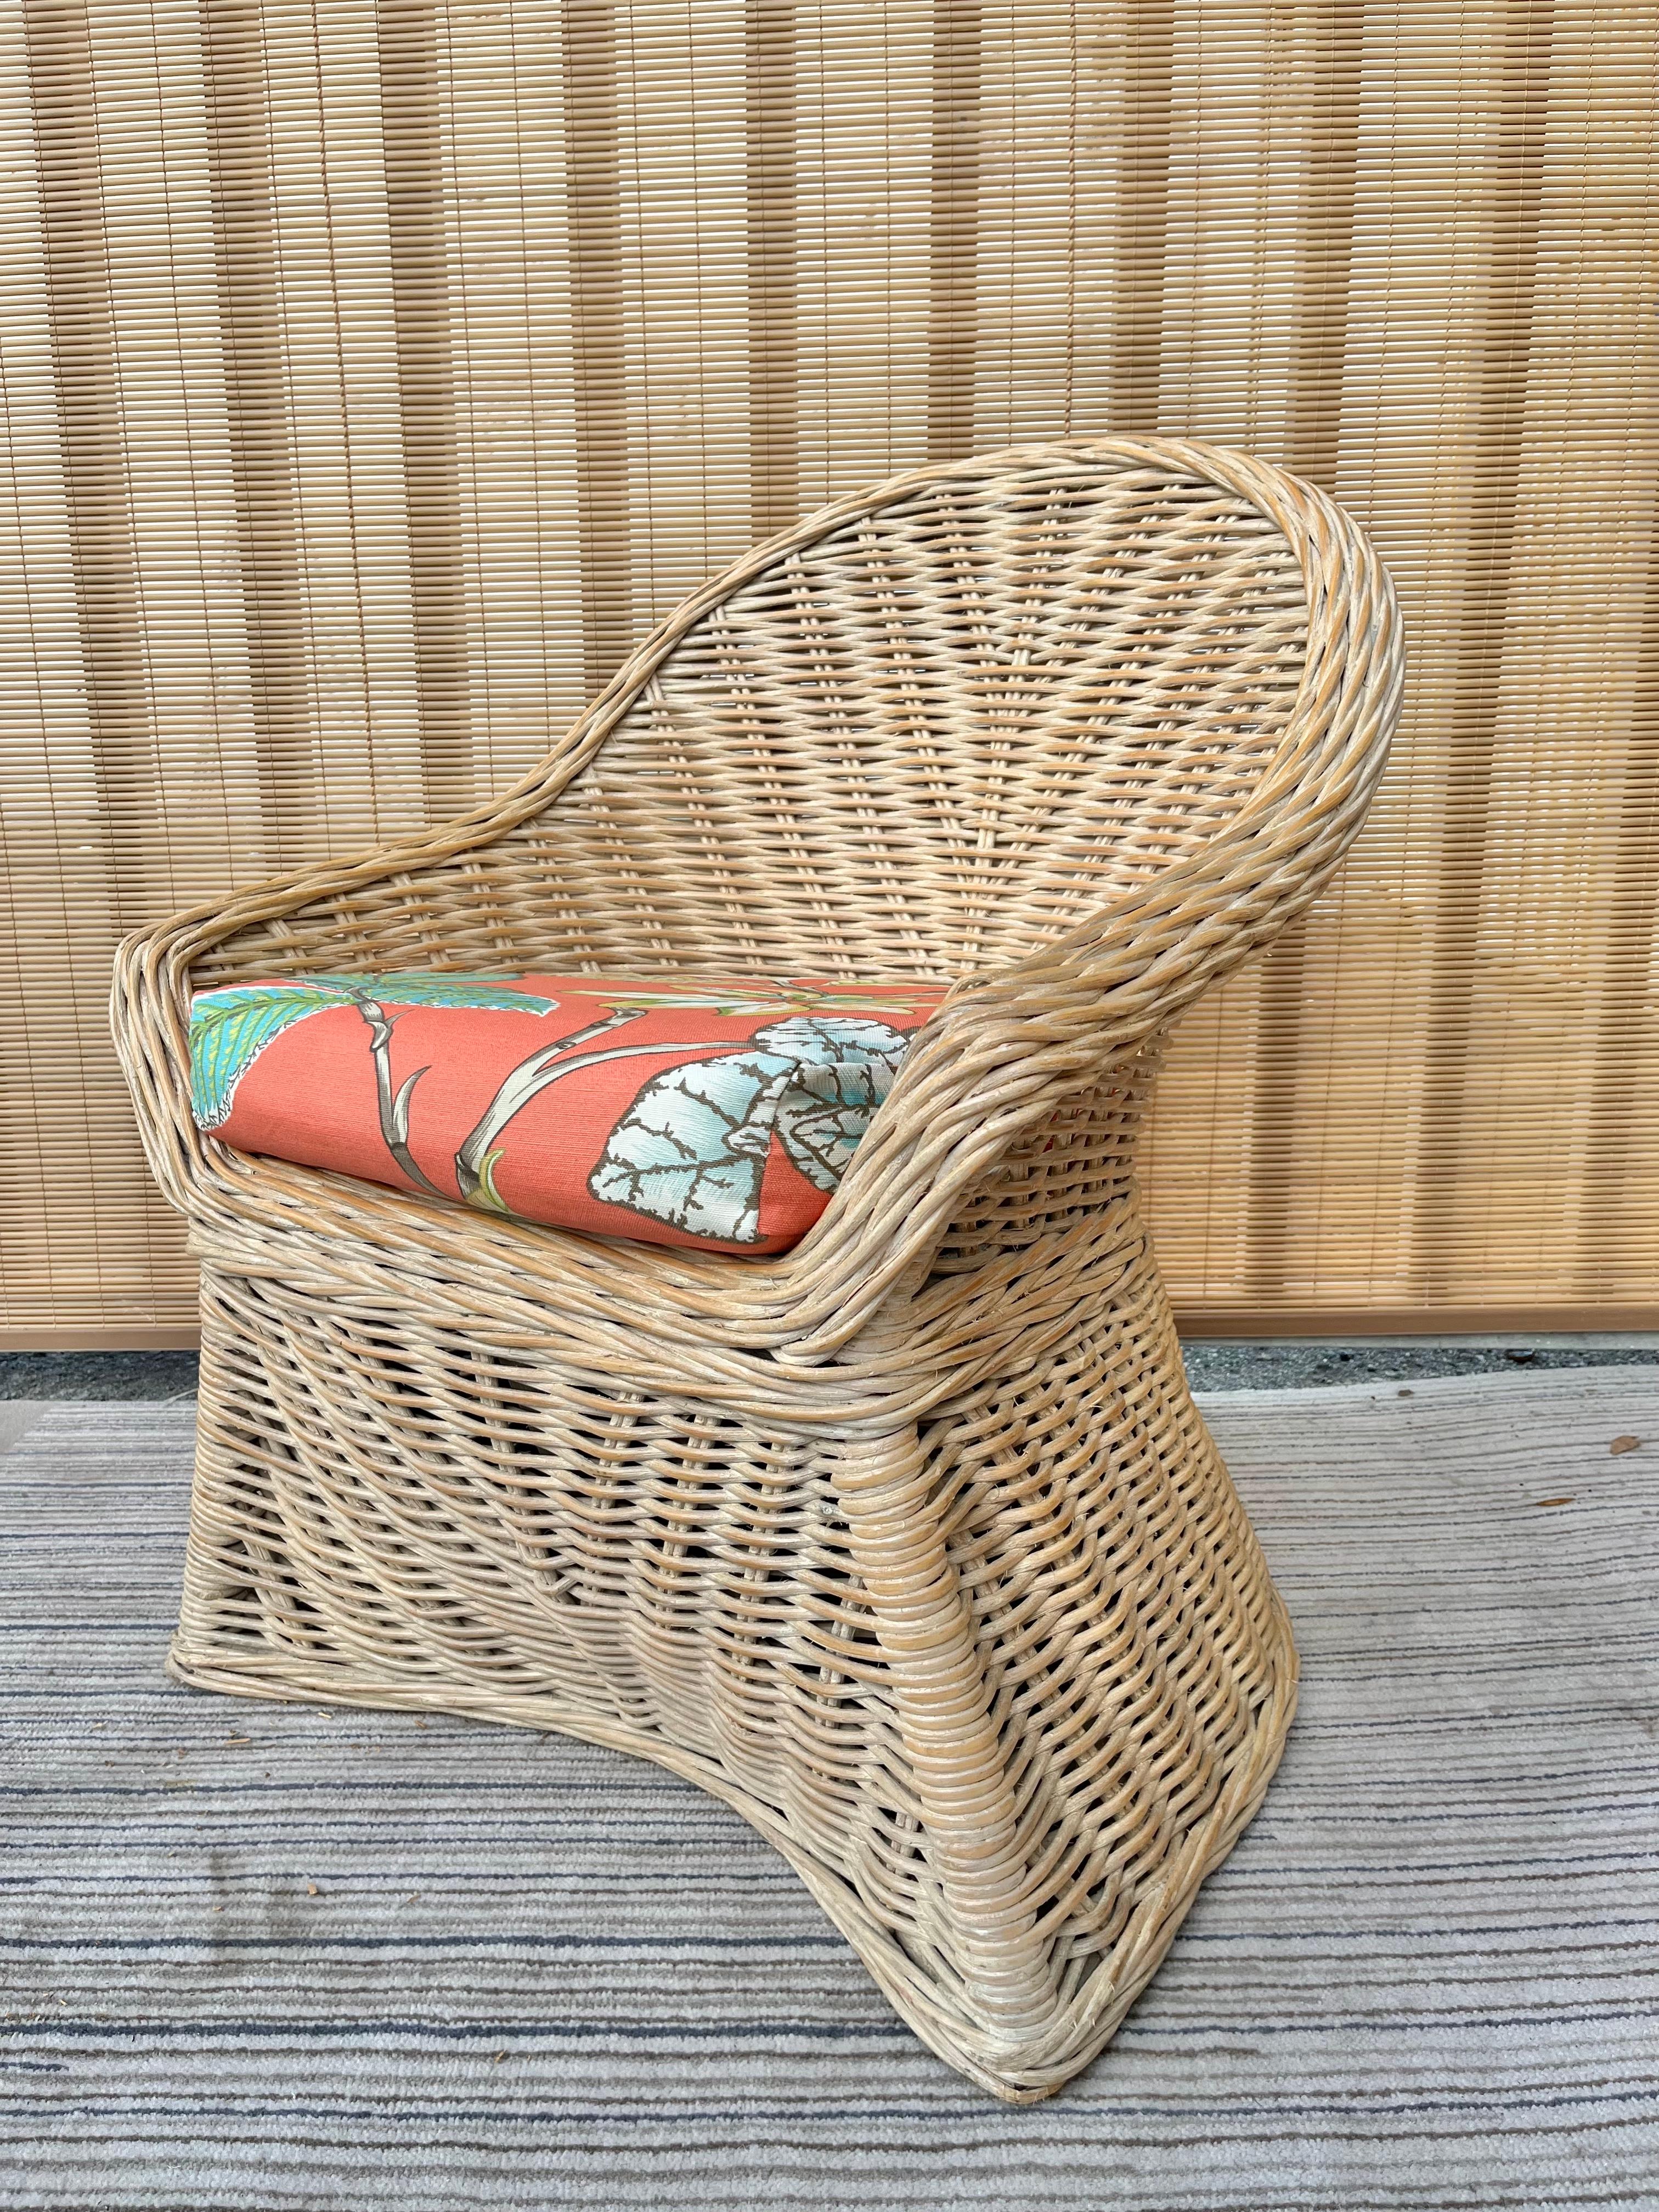 Gorgeous Late 20th century Twisted Rattan Coastal / Bohemian style Barrel back lounge chair with upholstery seat cushion. Circa 1990s
Features a Verner Panton Chair's Inspired design with white washed twisted rattan frame and a removable